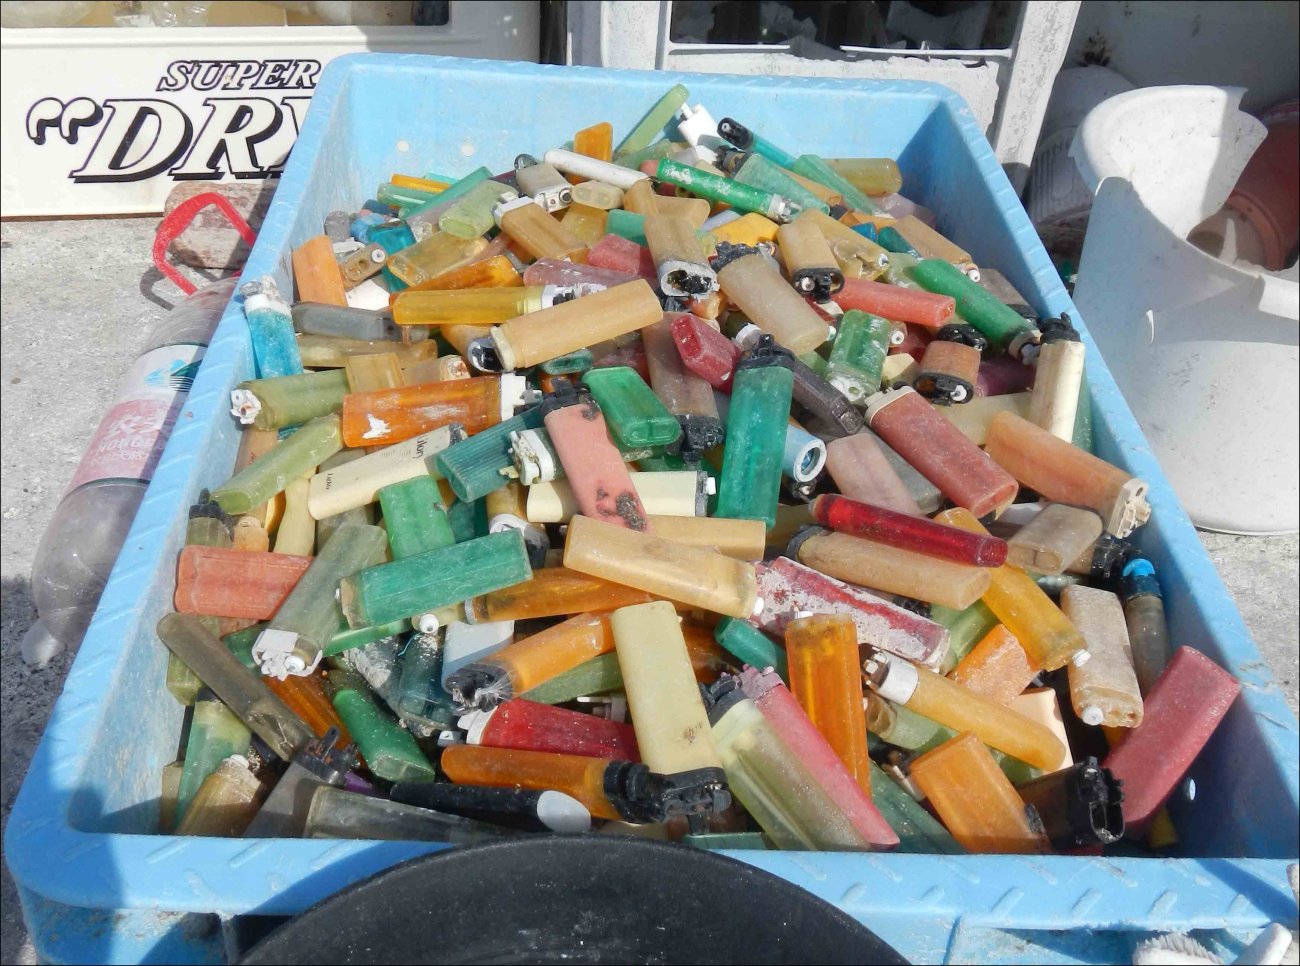 The contents of this plastic crate make up just a portion of the 1249cigarette lighters found on the shores of Midway Atoll in April 2013